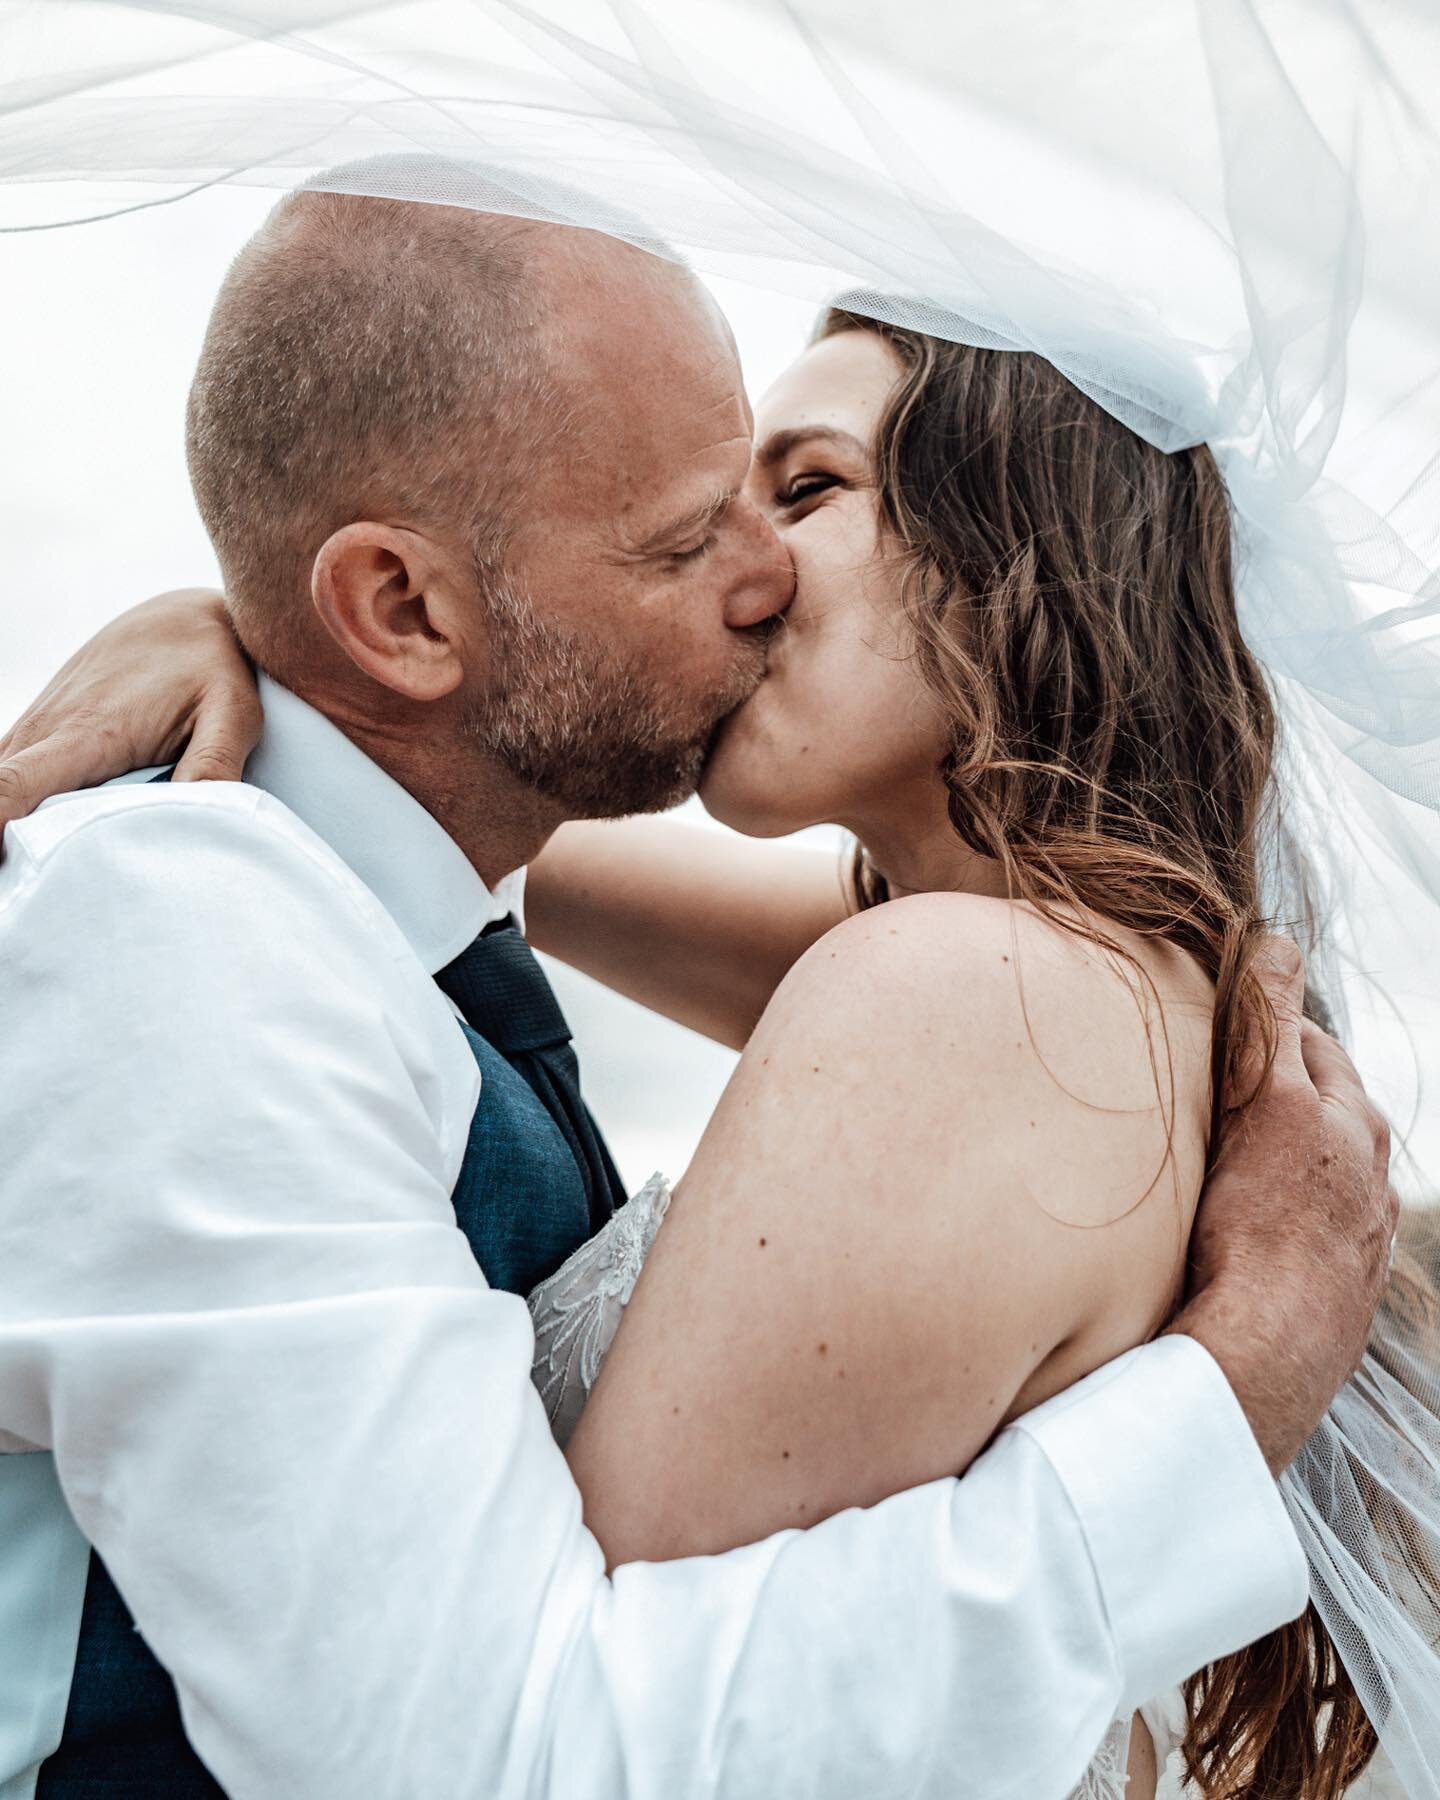 Marc &amp; Eva&rsquo;s wedding day was such a special one, capturing their pure love and devotion to one another was so inspiring. 

I&rsquo;ve been busy finalising the edit on their film this week and it&rsquo;s brought tears, laughter and a whole l